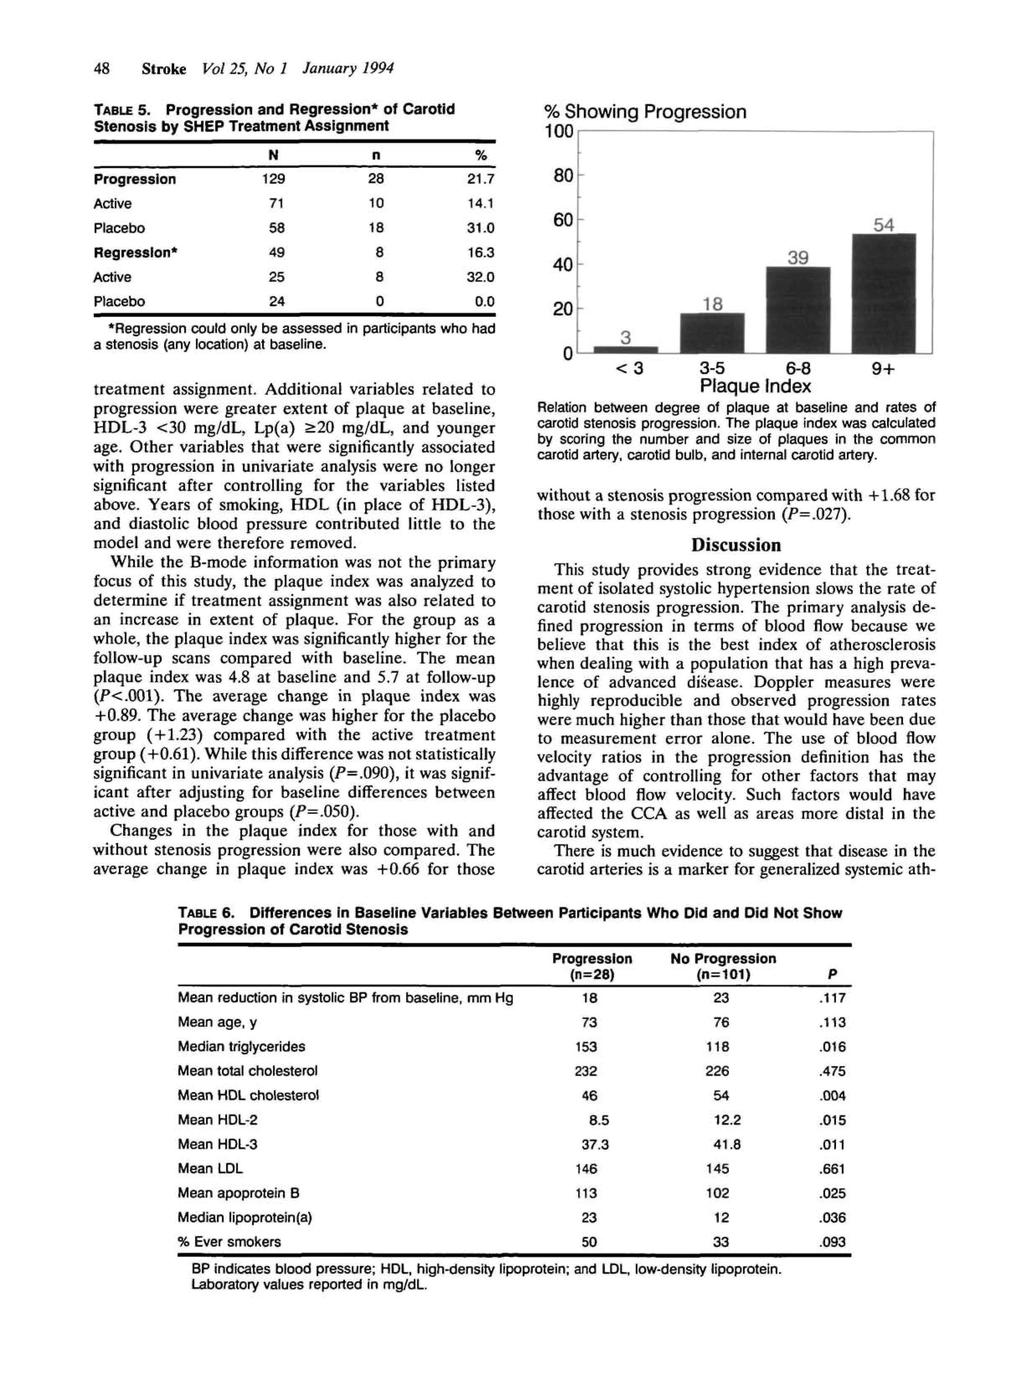 48 Stroke Vol, No 1 January 1994 TABLE 5. Progression and Regression* of Carotid Stenosis by SHEP Treatment Assignment % Showing Progression 100 N n % 129 28 21.7 Active 71 10 14,1 Placebo 58 18 31.